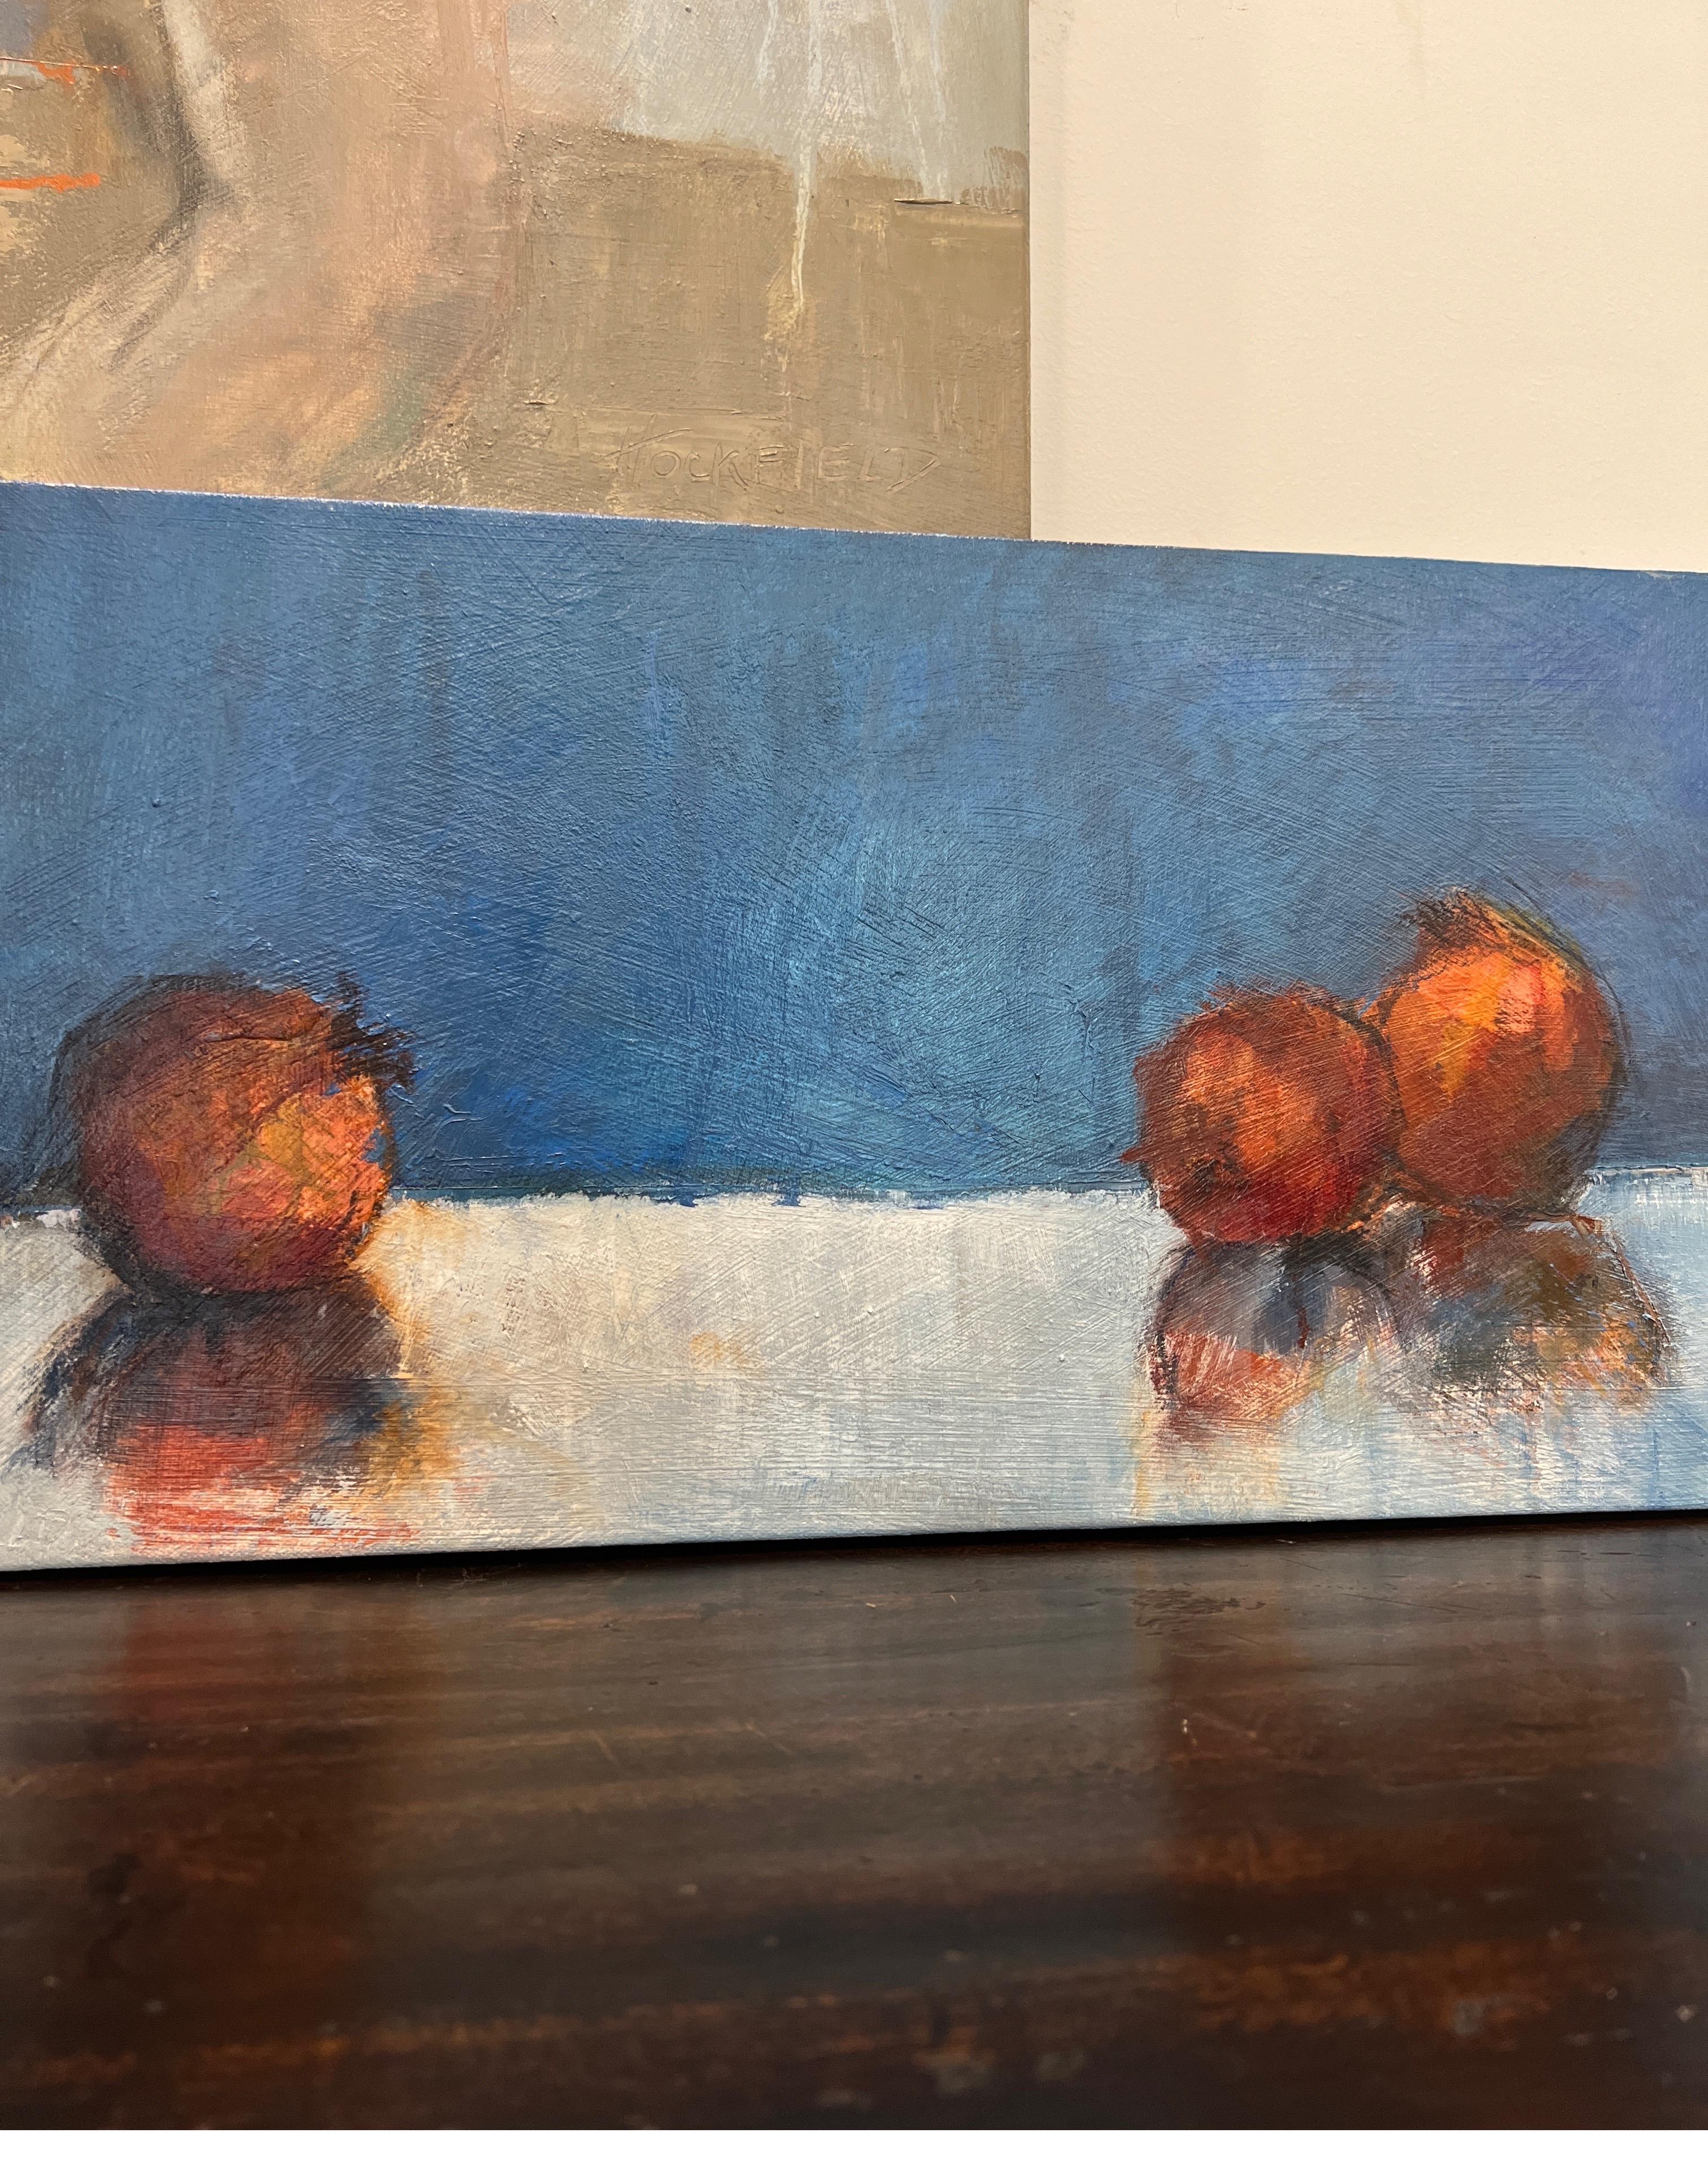 3 Poms by Sharon Hockfield, Contemporary Still Life Painting Oil on Canvas 6